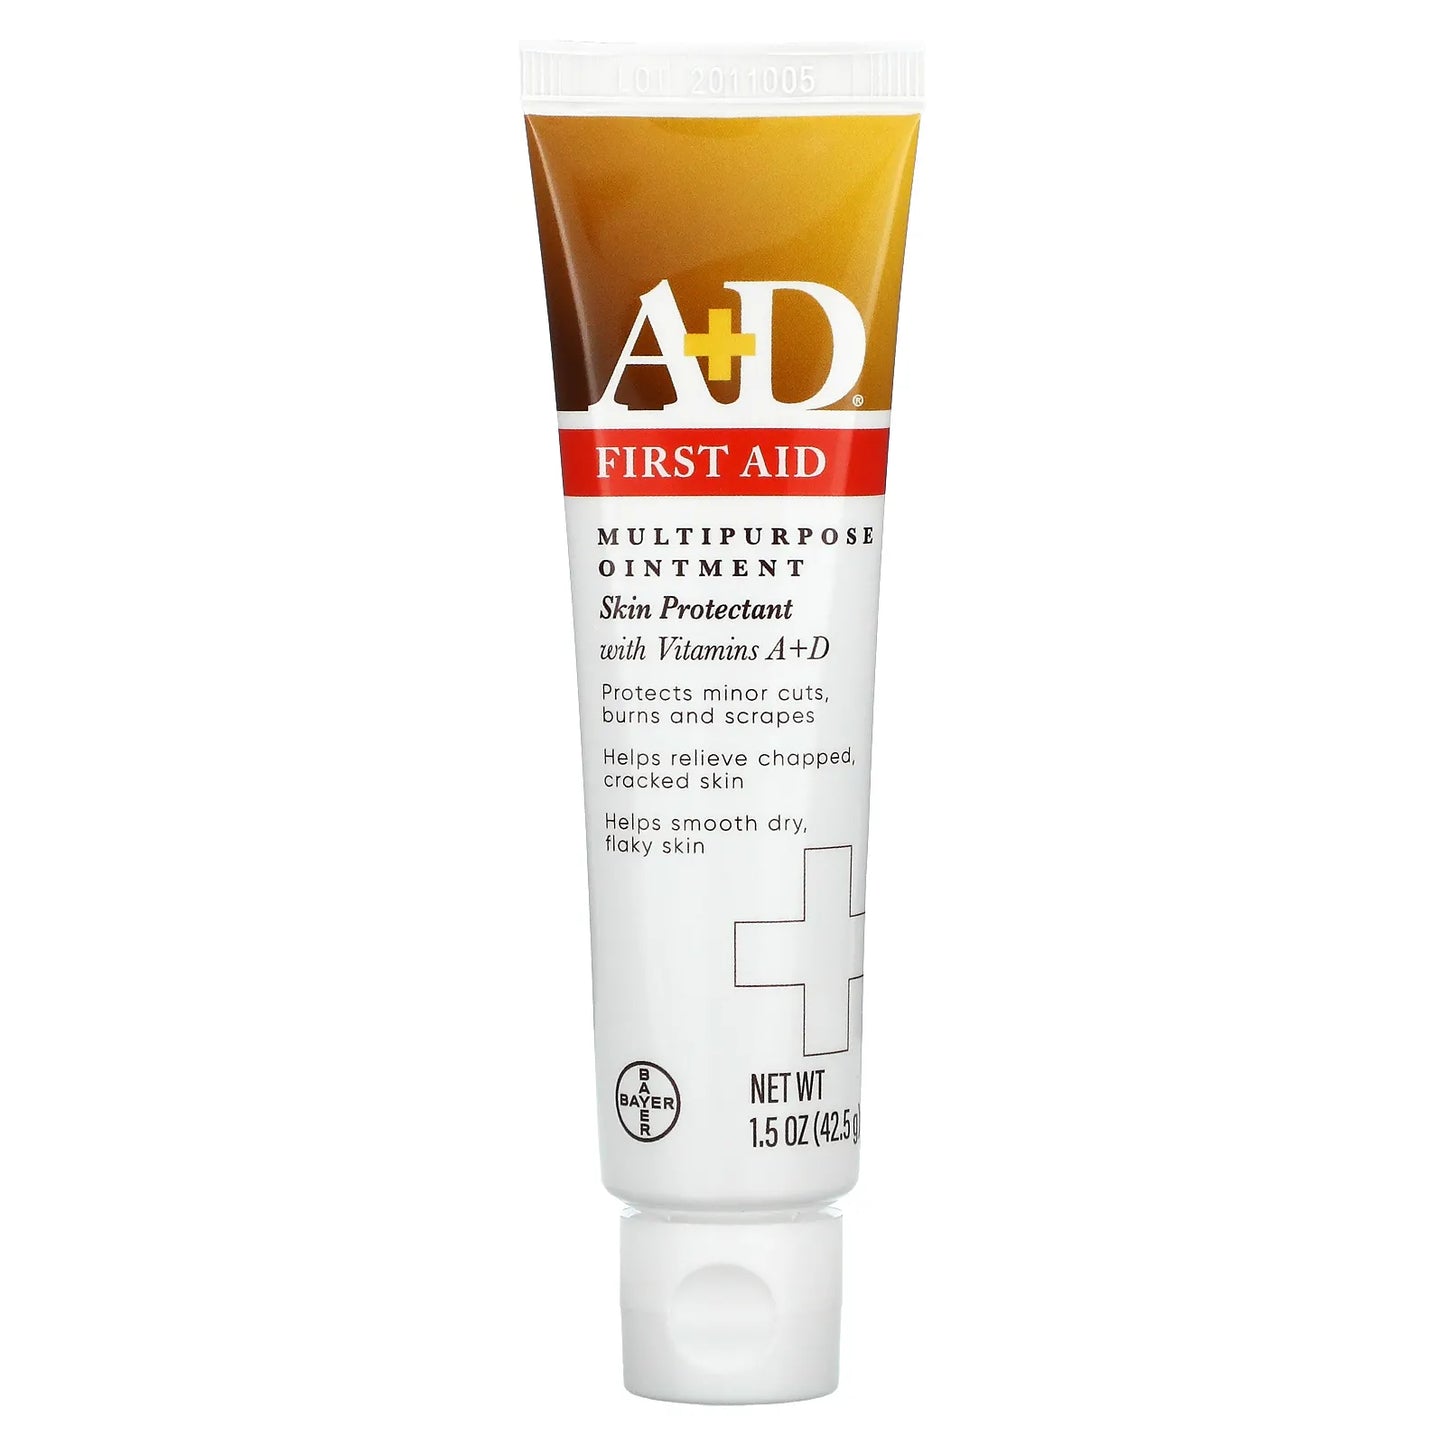 A+D FIRST AID MULTIPURPOSE OINTMENT